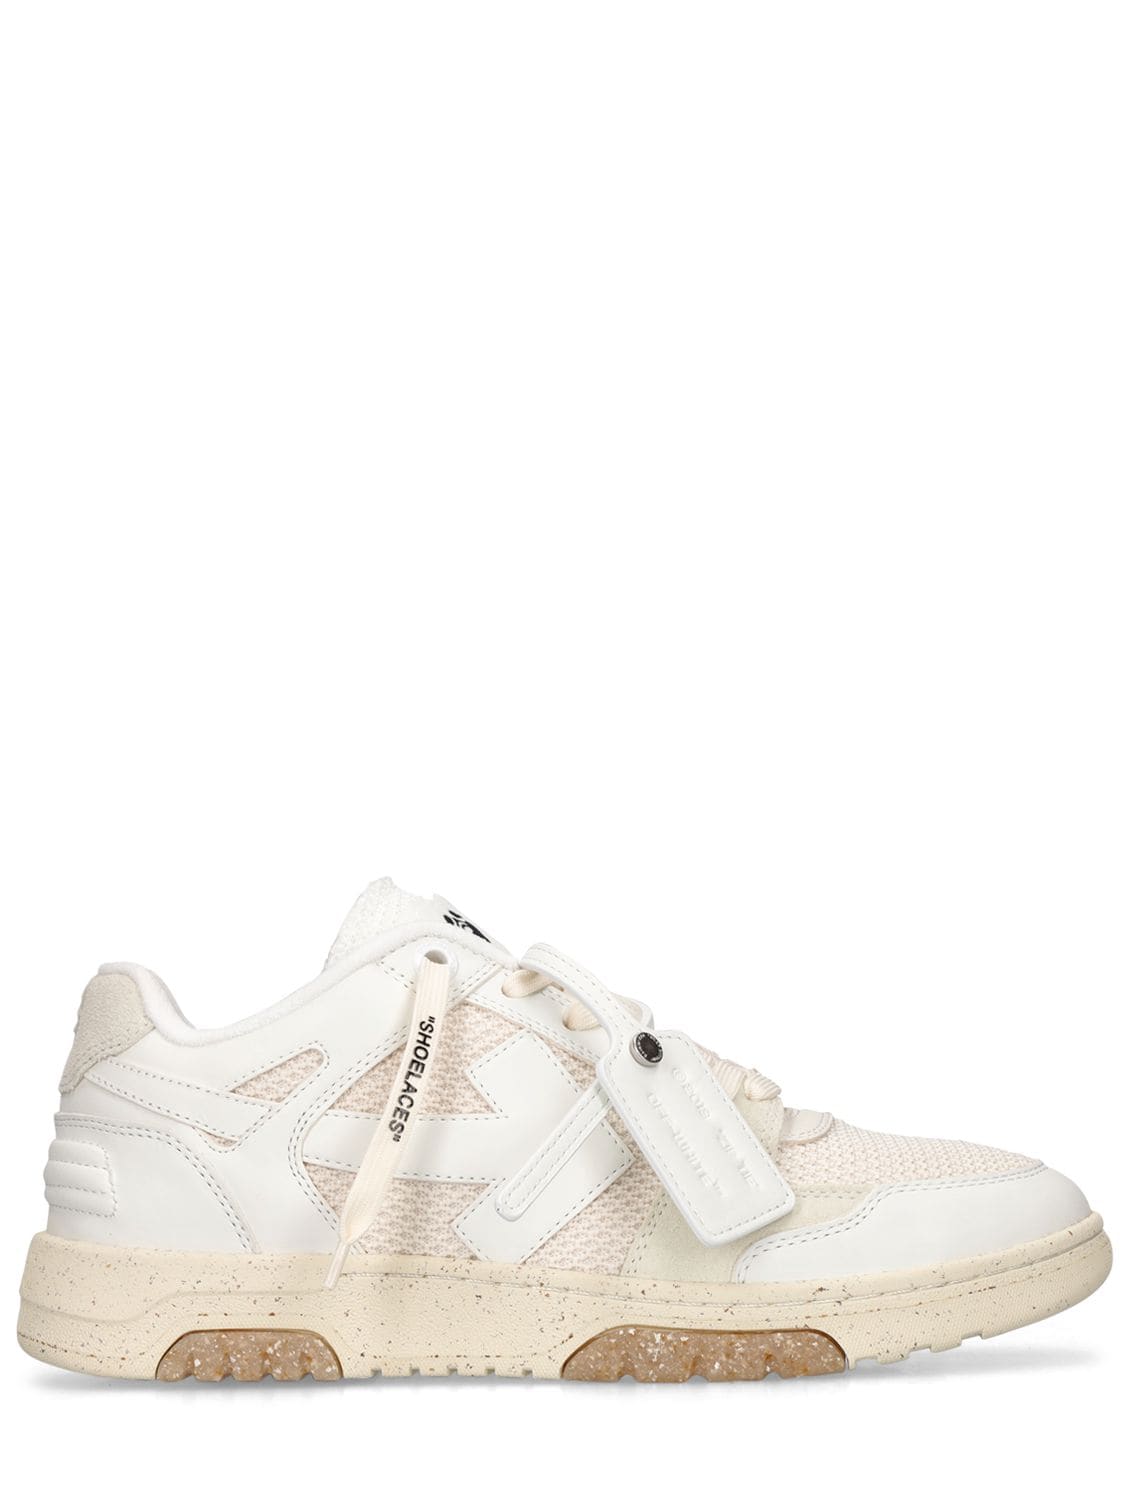 OFF-WHITE SLIM OUT OF OFFICE LEATHER SNEAKERS